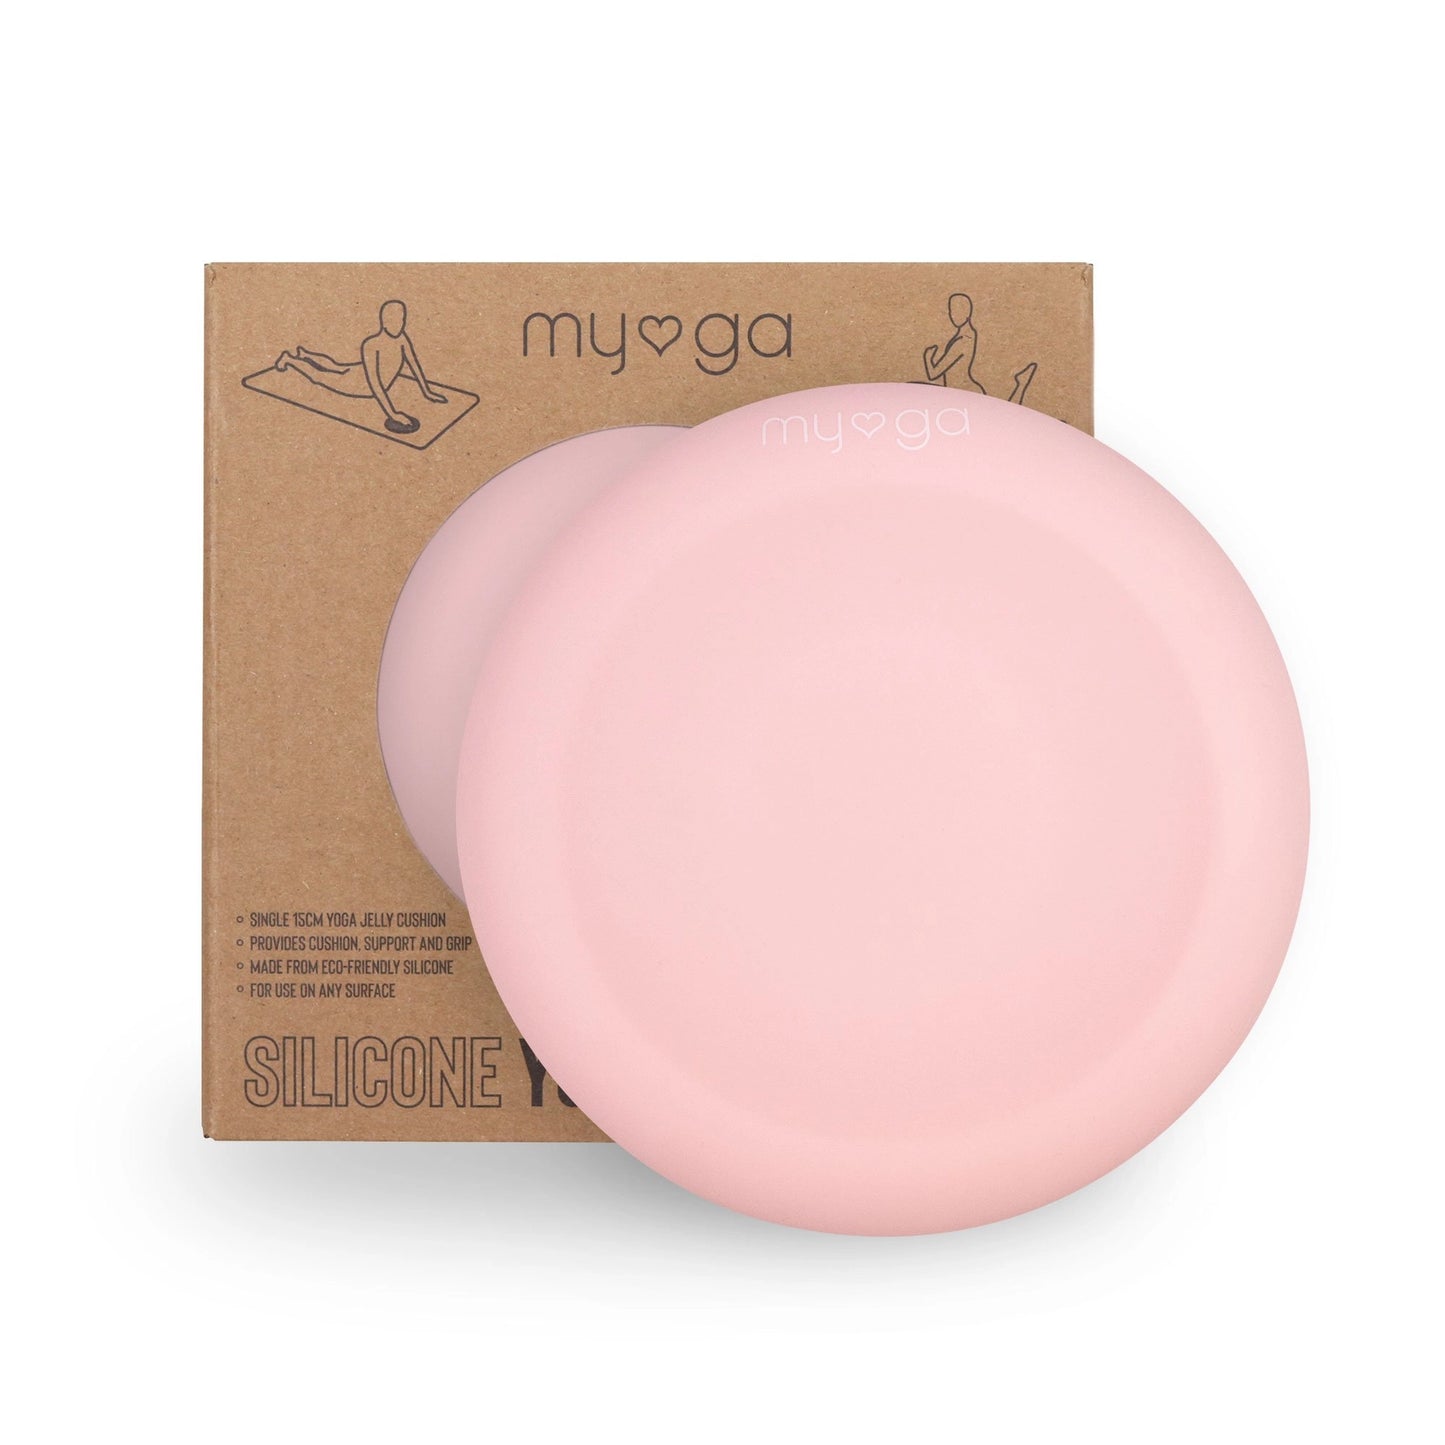 Yoga Support Jelly Pad